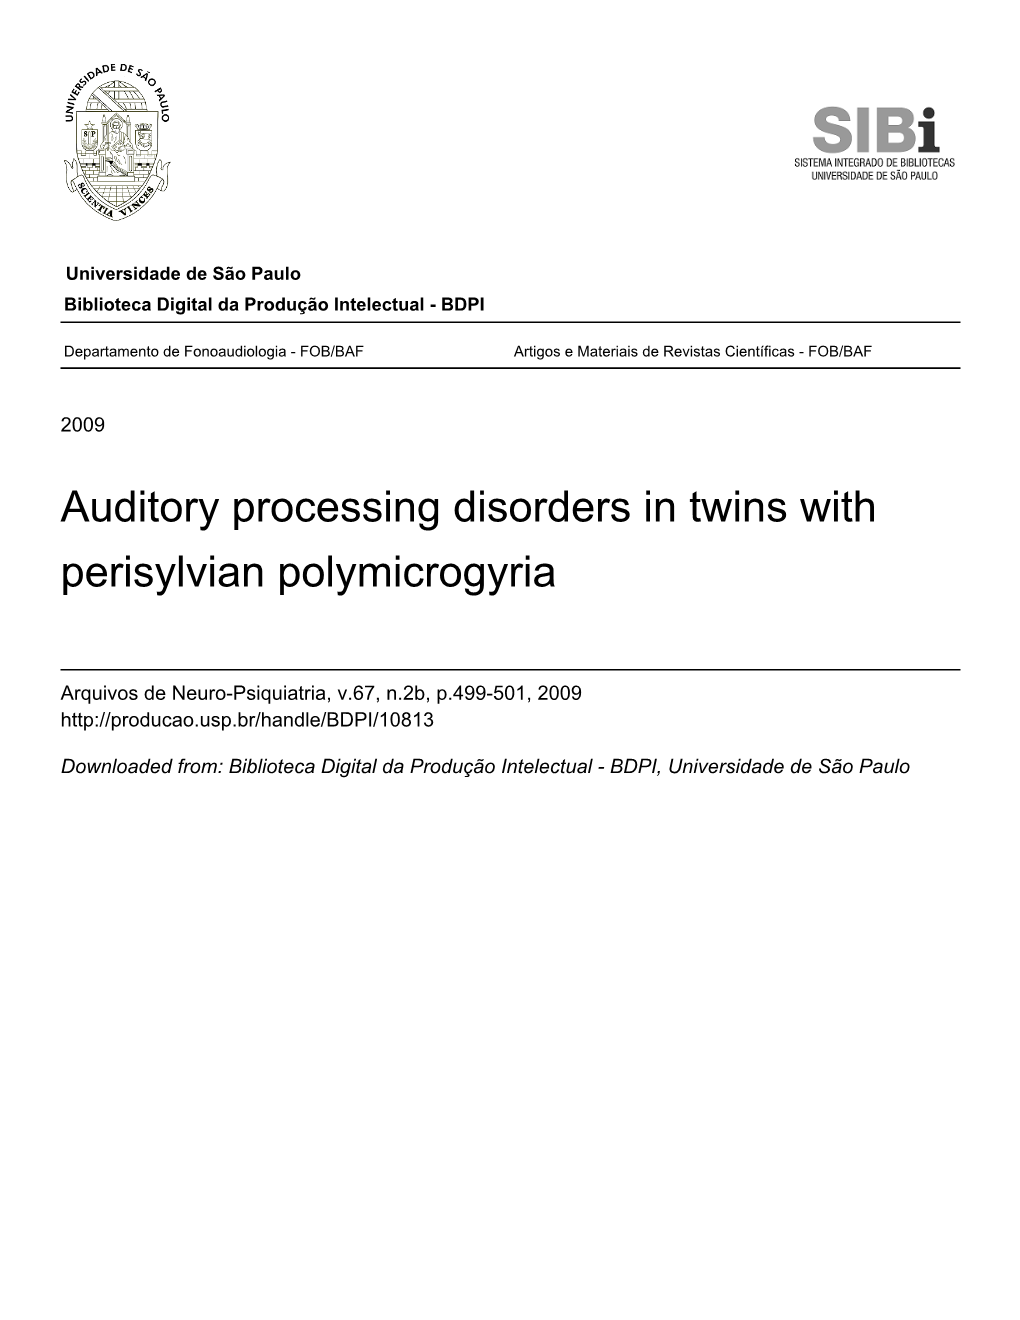 Auditory Processing Disorders in Twins with Perisylvian Polymicrogyria